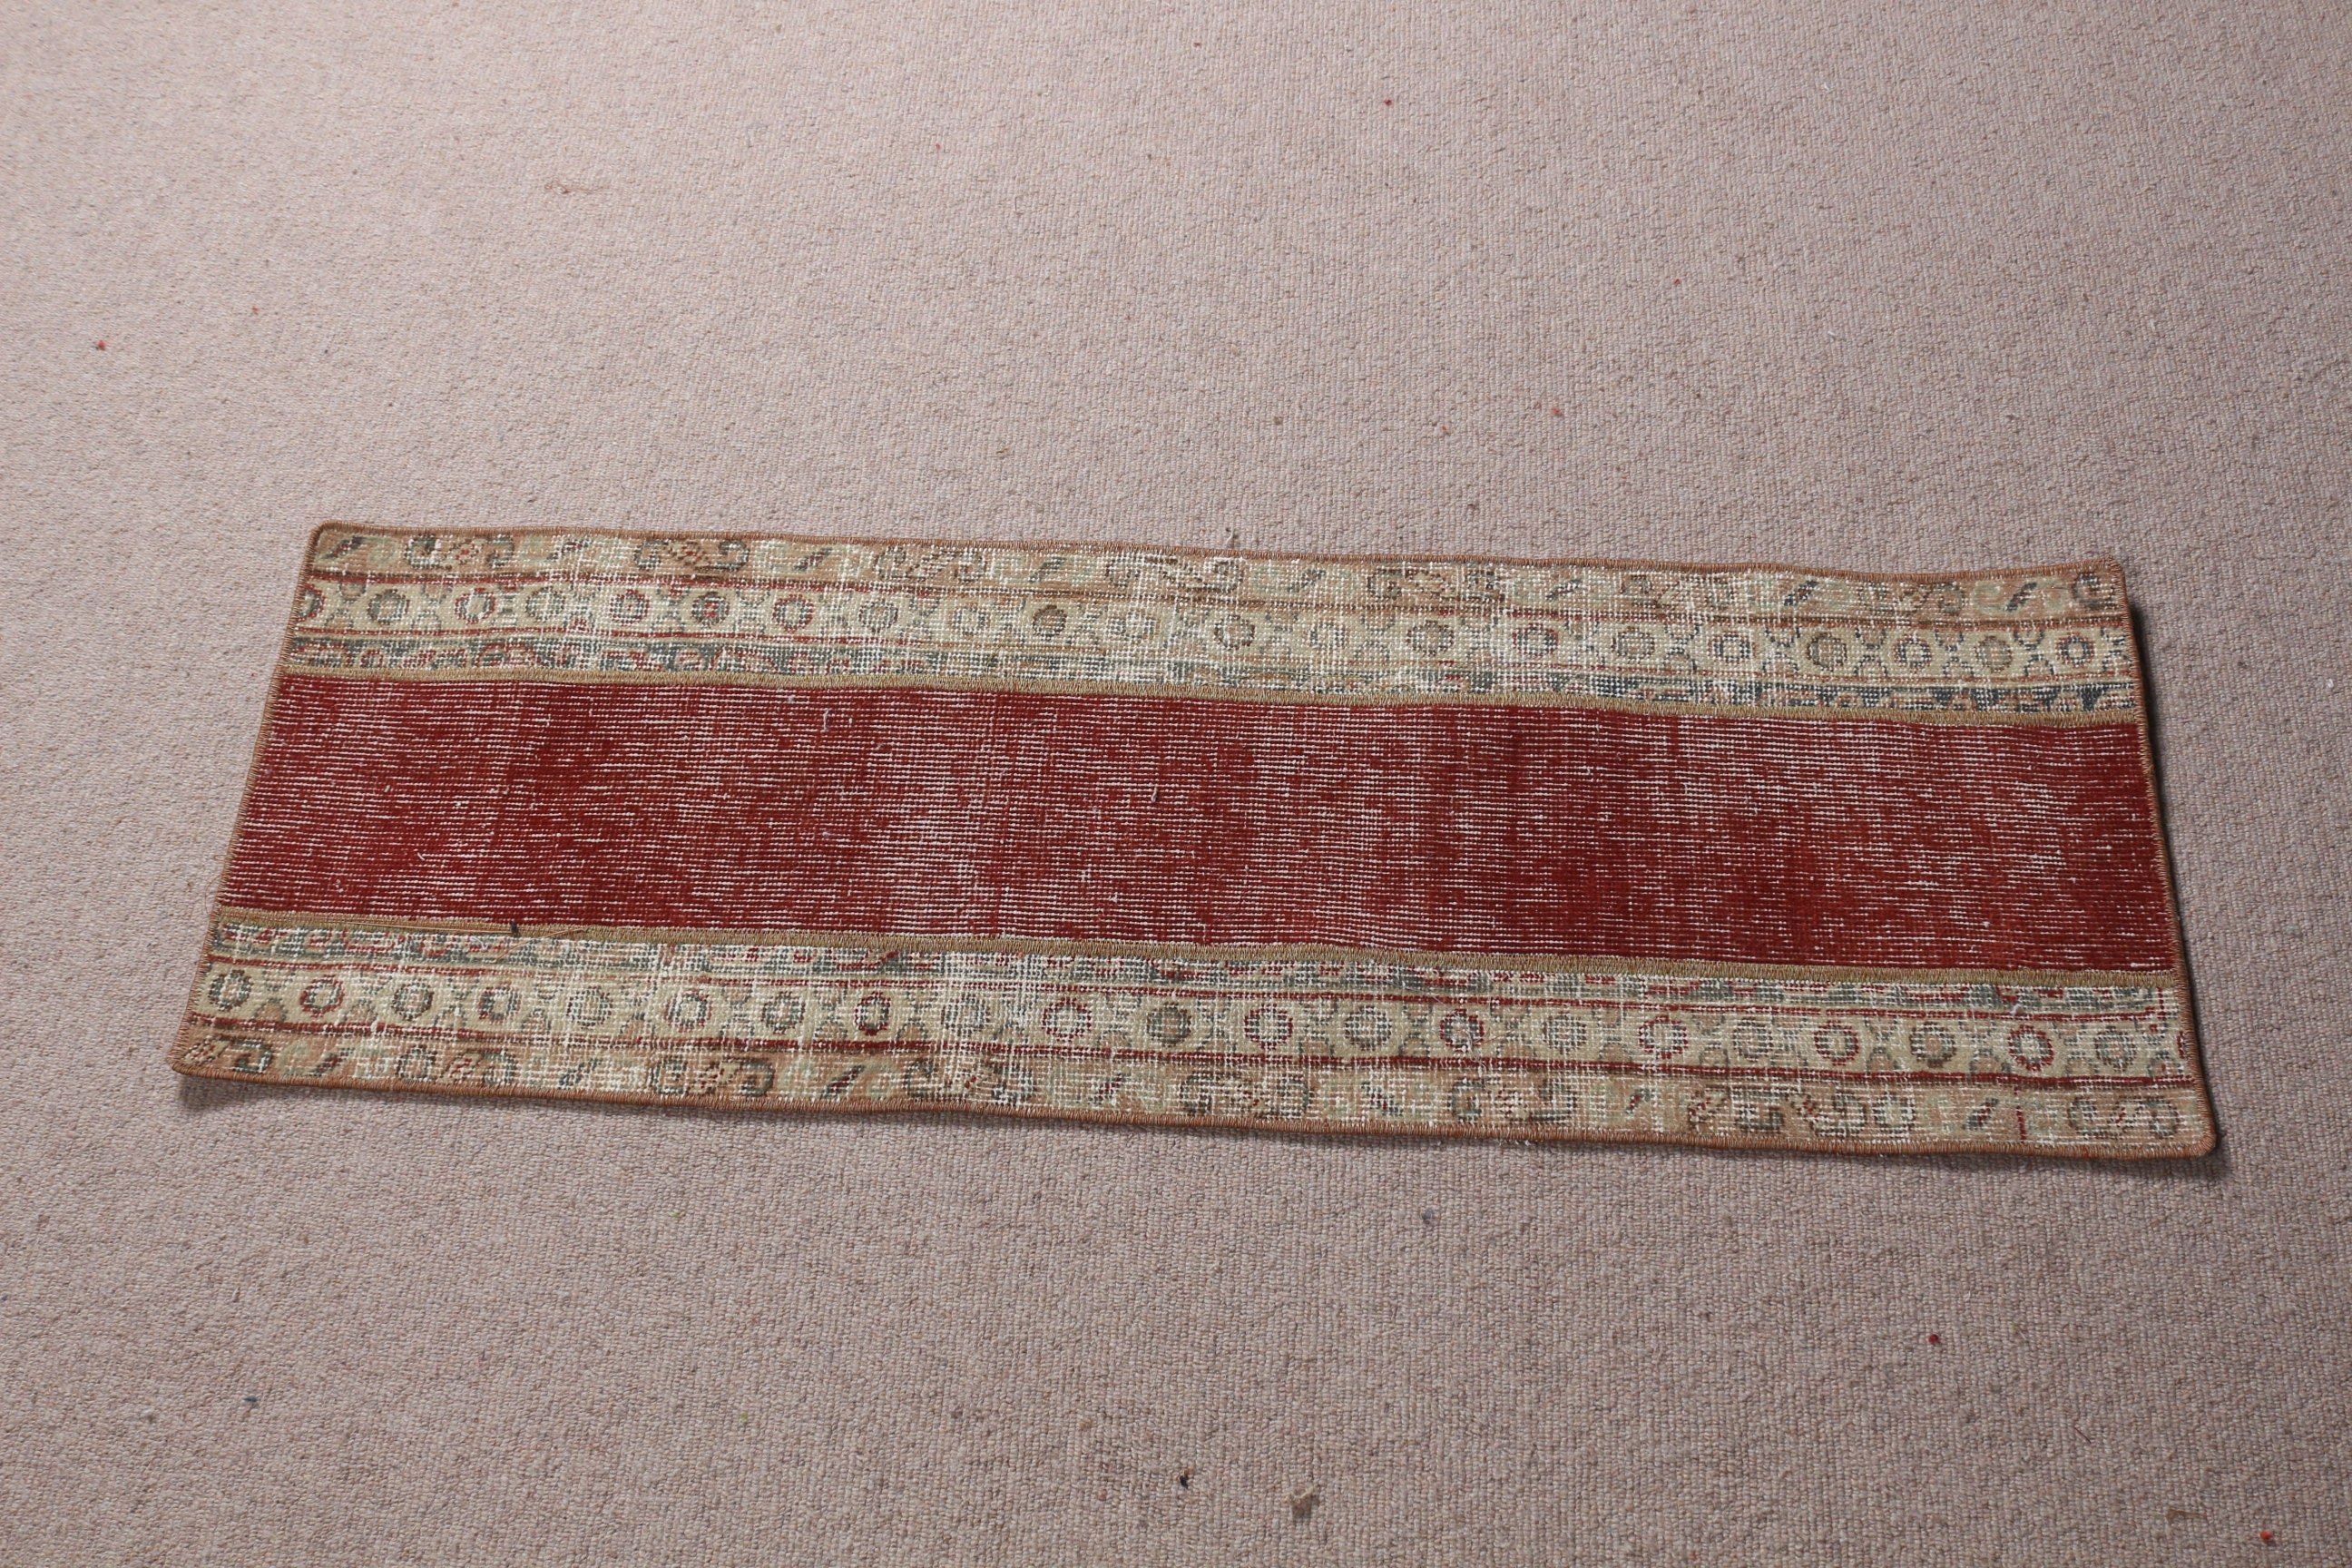 Red Moroccan Rug, Entry Rug, Kitchen Rug, Oriental Rugs, Rugs for Car Mat, 1.3x4 ft Small Rug, Vintage Rug, Turkish Rug